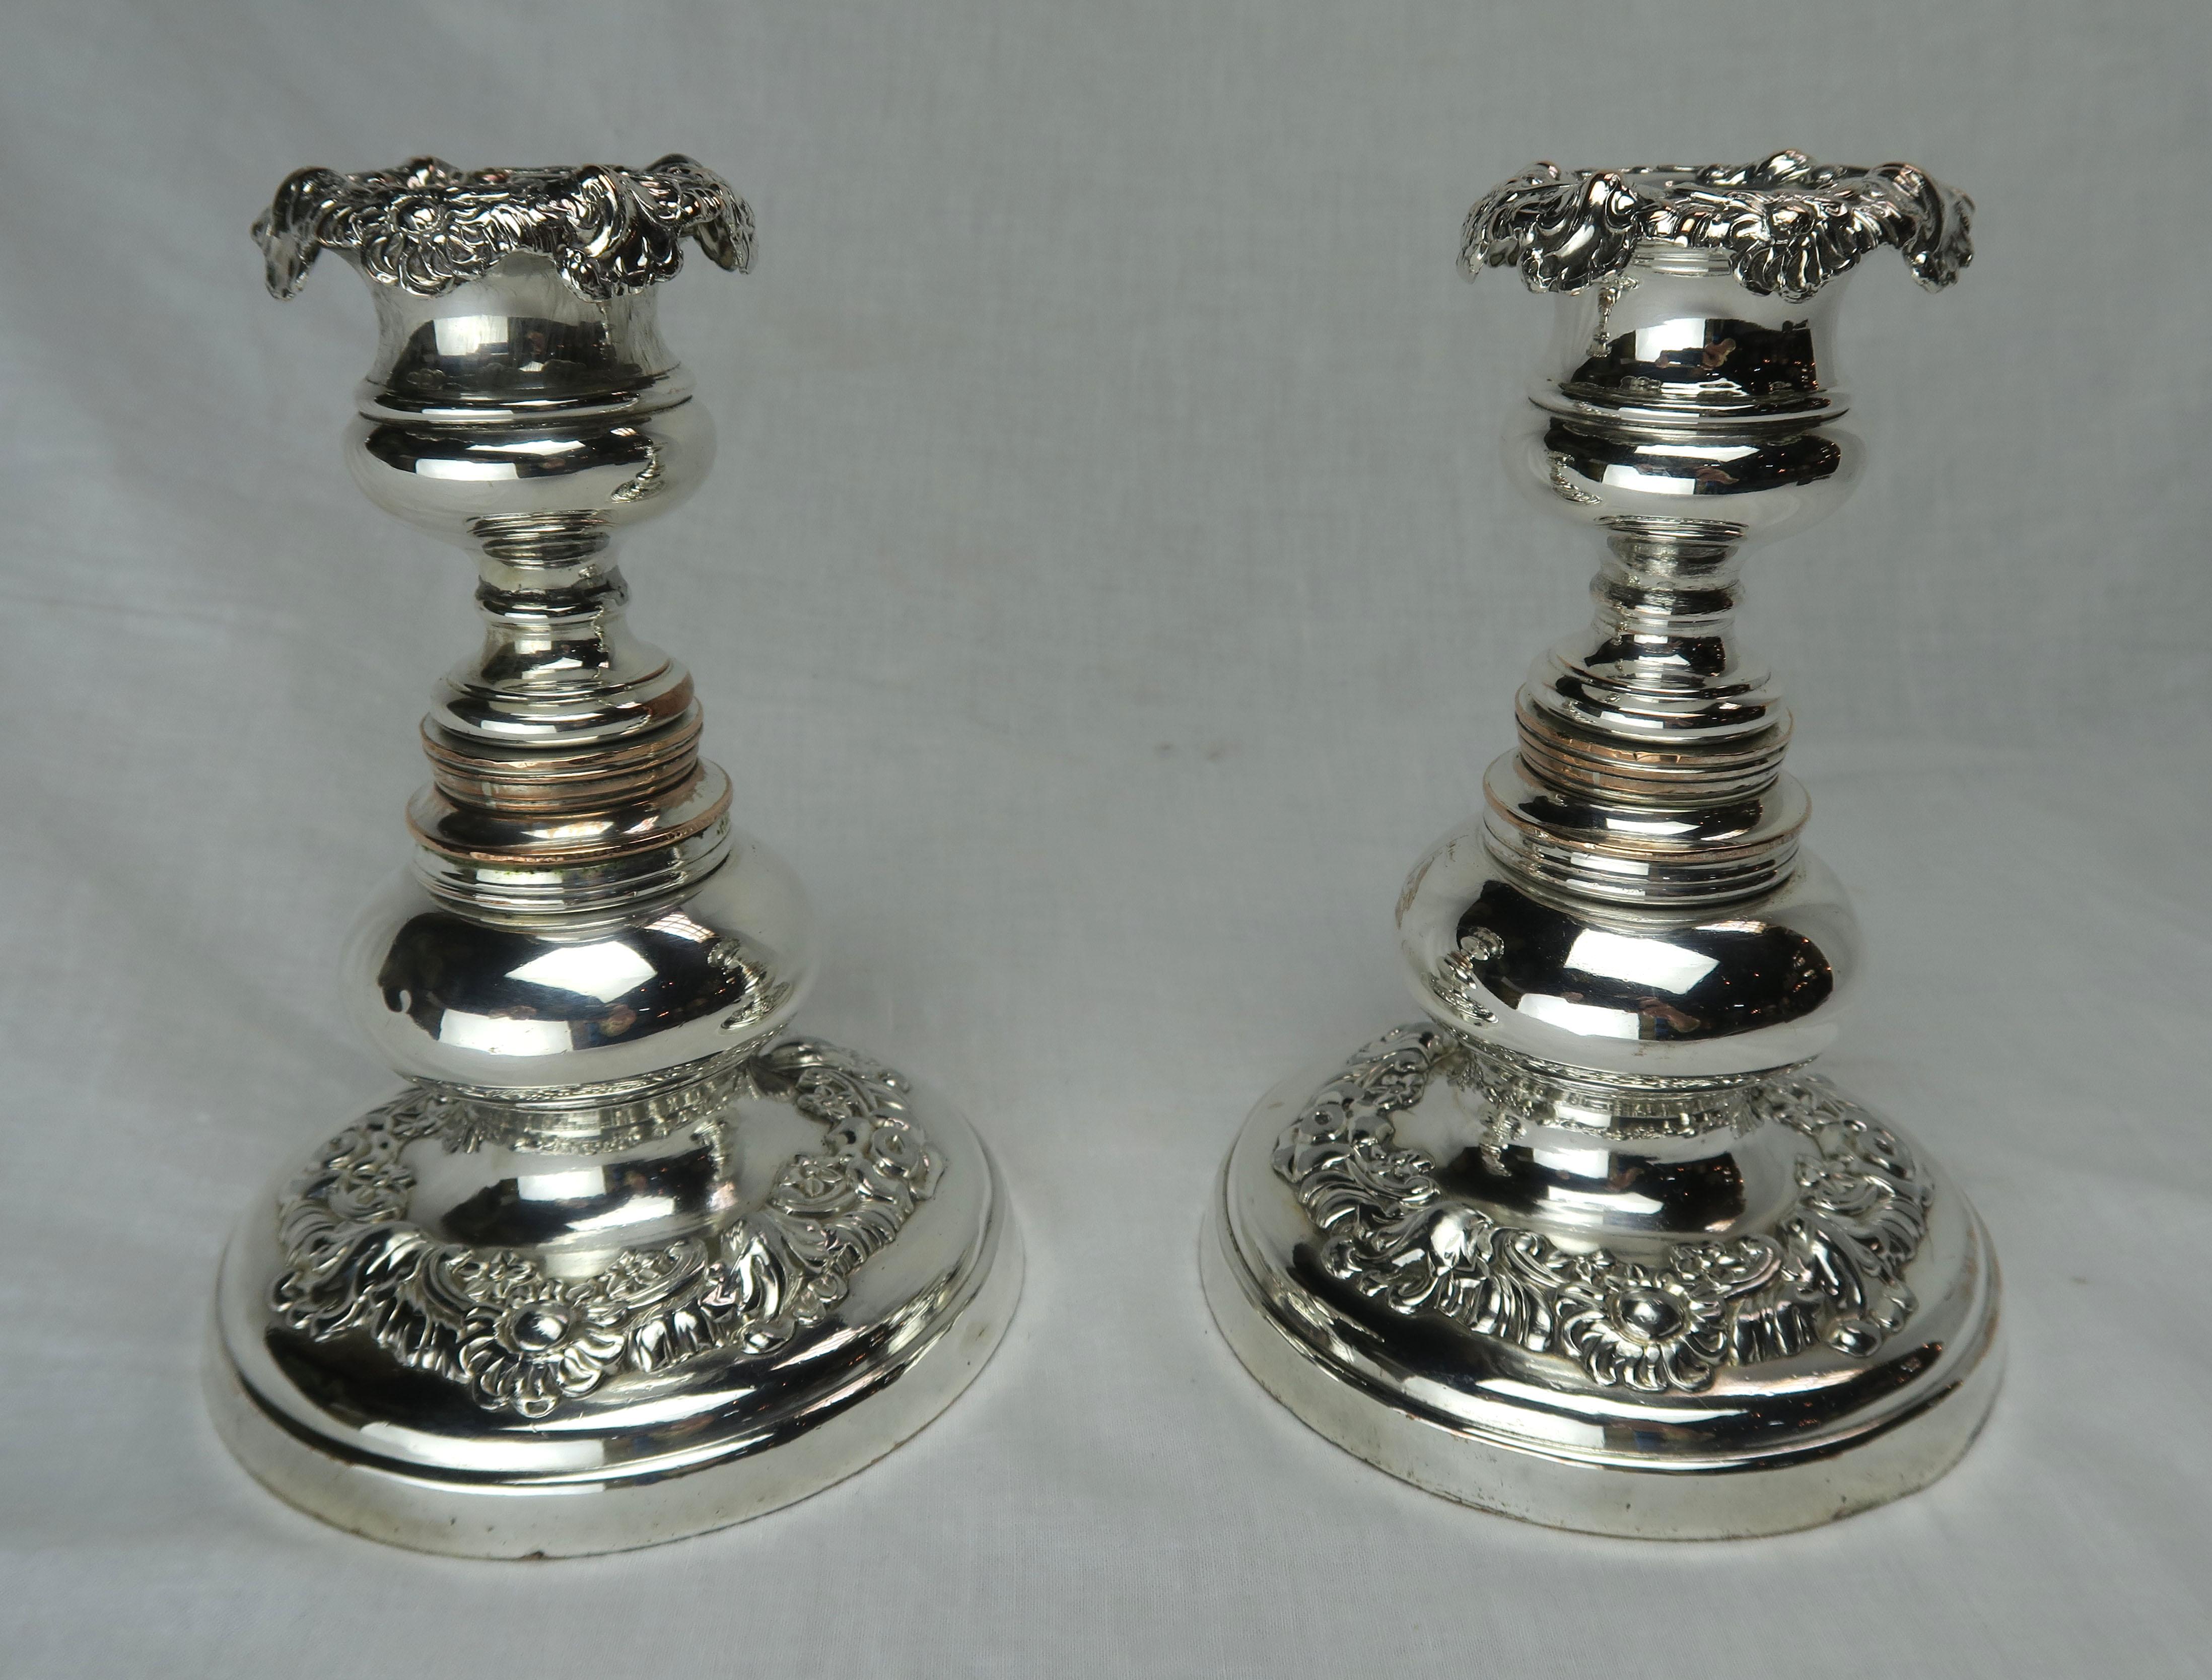 Pair of English silver repoussee candlesticks with floral design throughout. Heavy silver over copper plated. No makers mark.